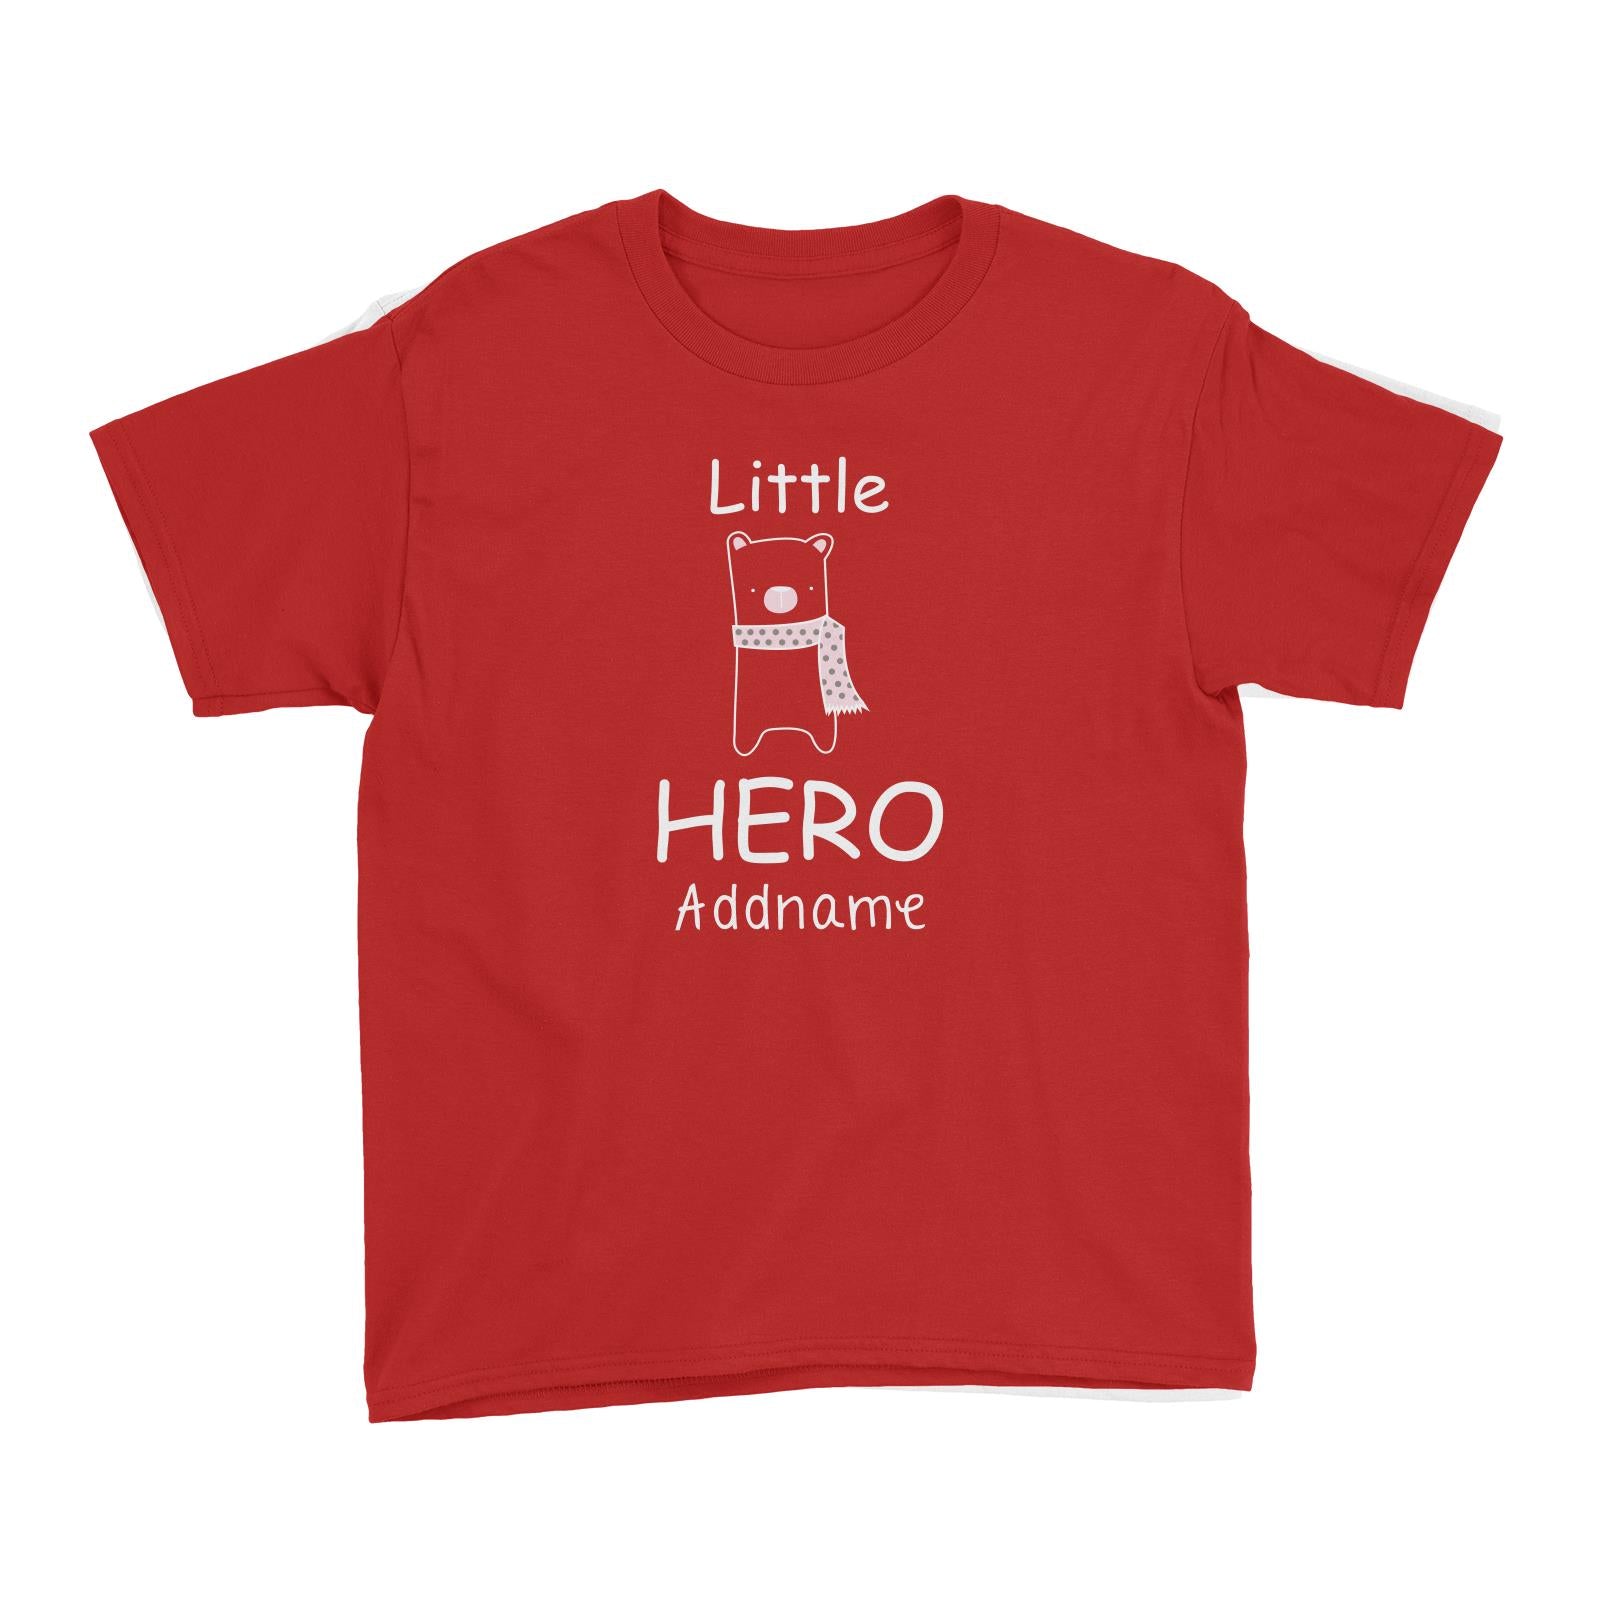 Cute Animals and Friends Series 2 Bear Little Hero Addname Kid's T-Shirt